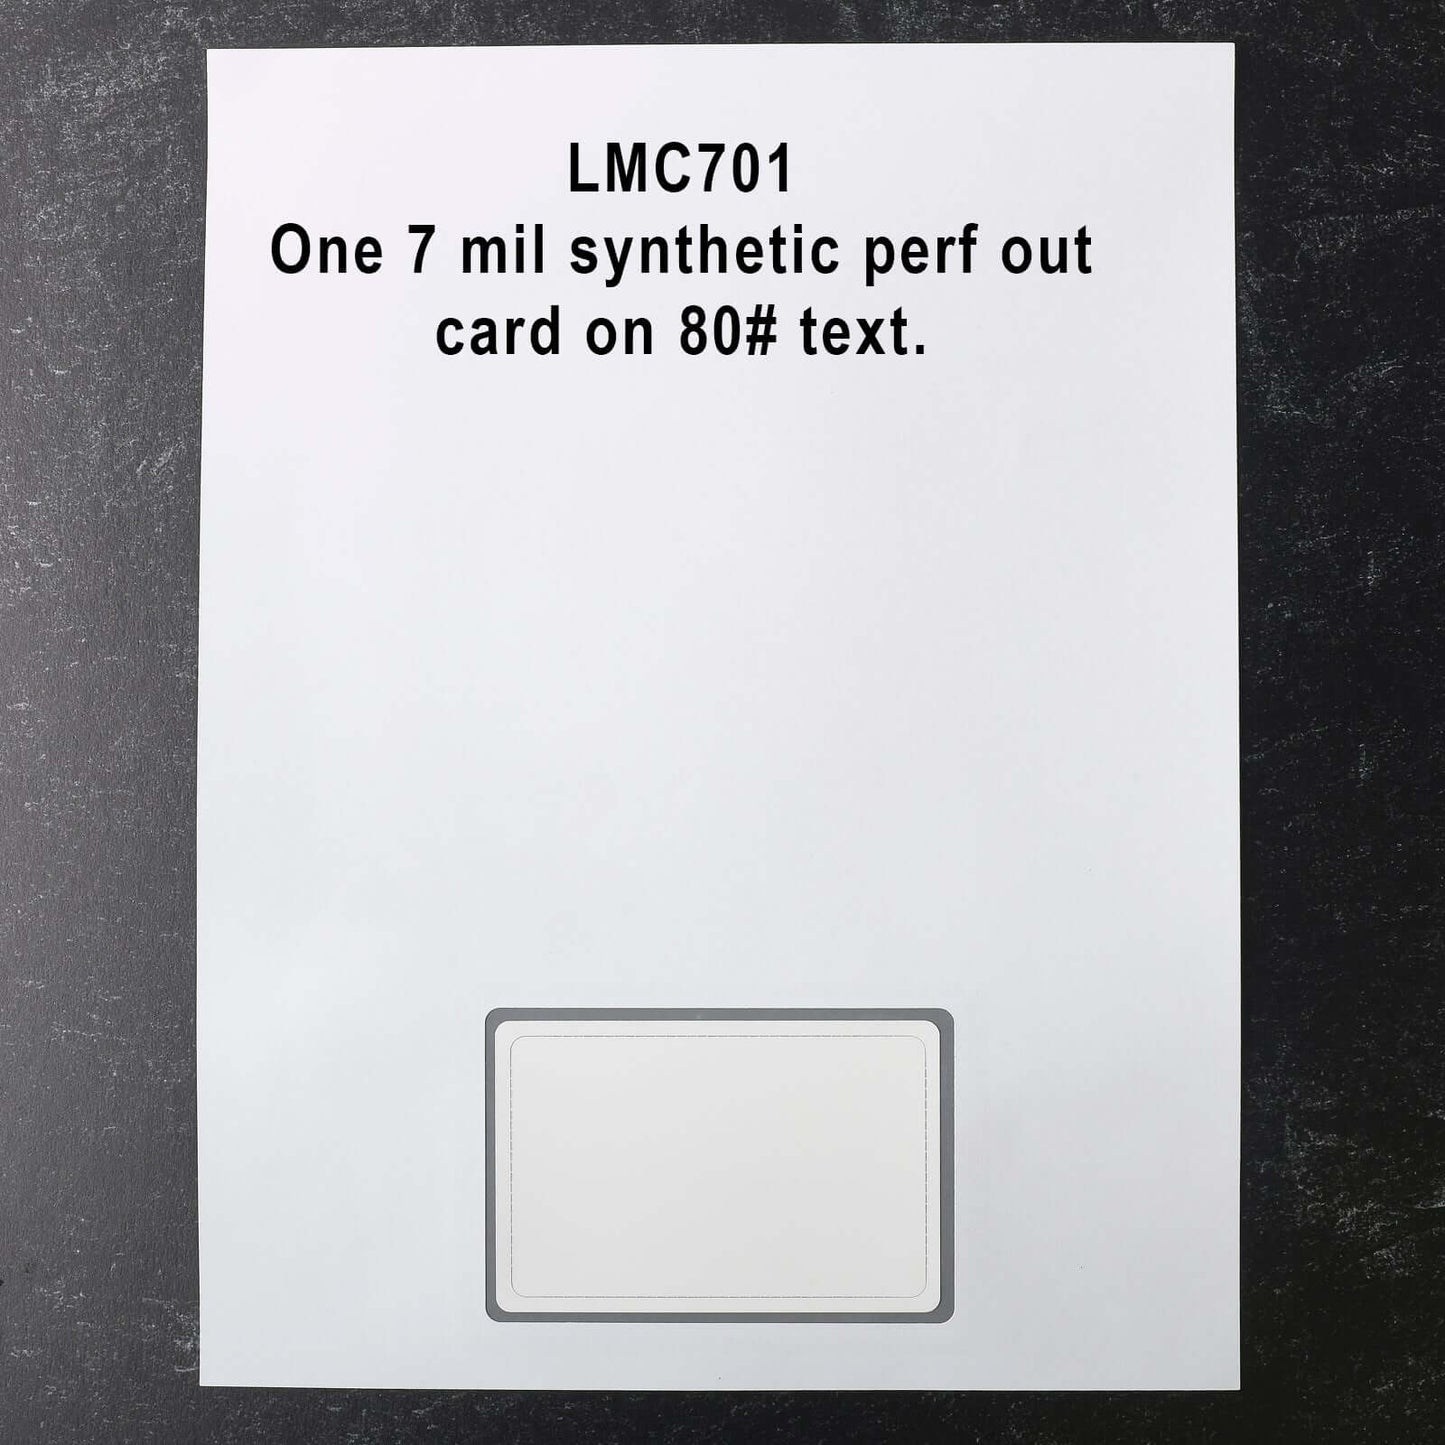 LMC701 Laser Membership Cards for Printers for Printers perf out style